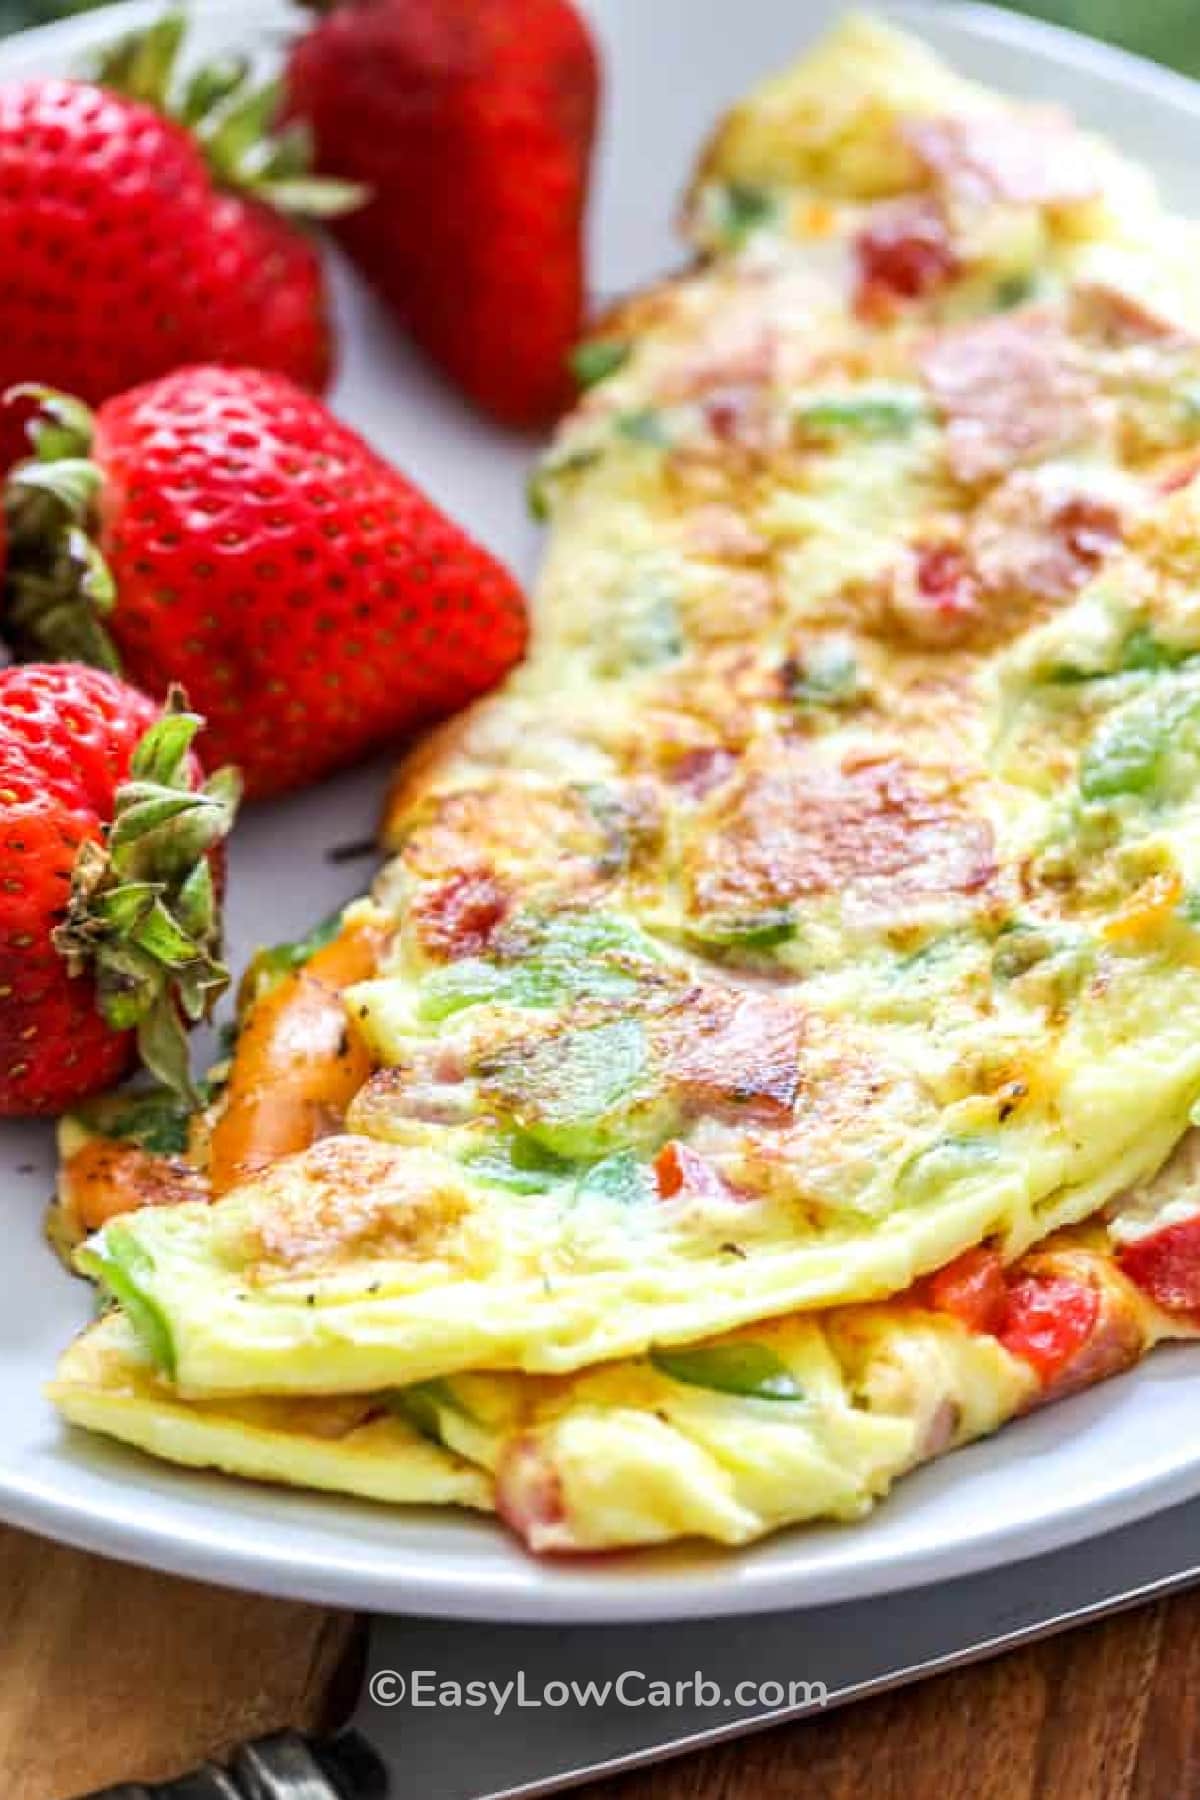 Denver omelet on a white plate with fresh strawberries on the side